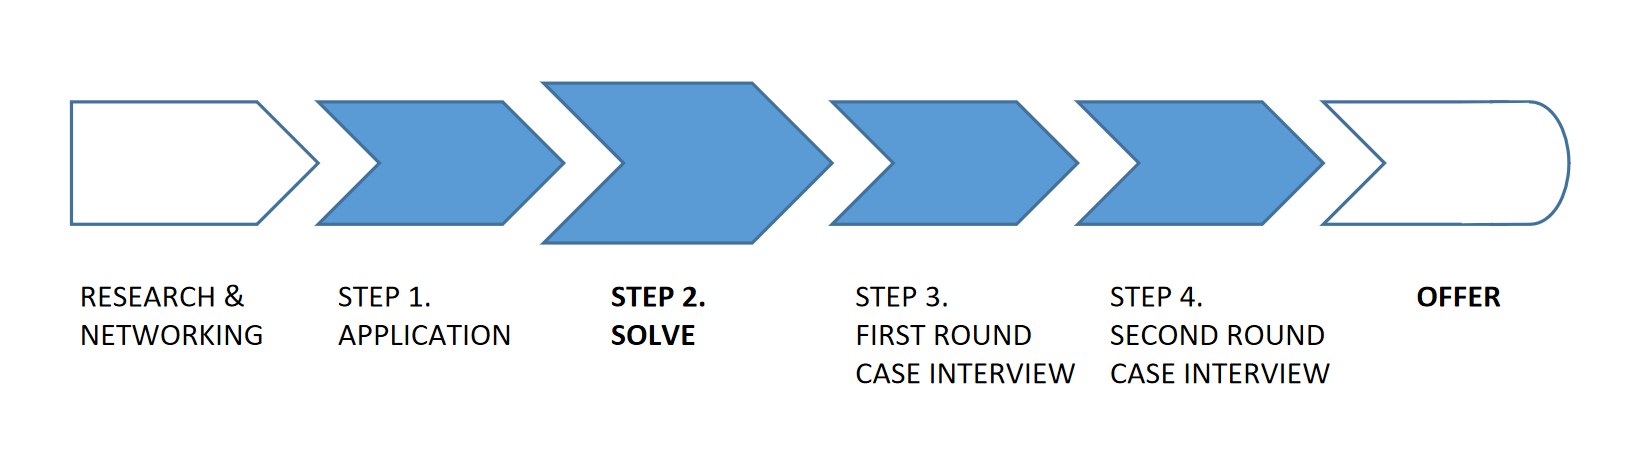 Flow chart showing the different stages of the McKinsey recruitment process